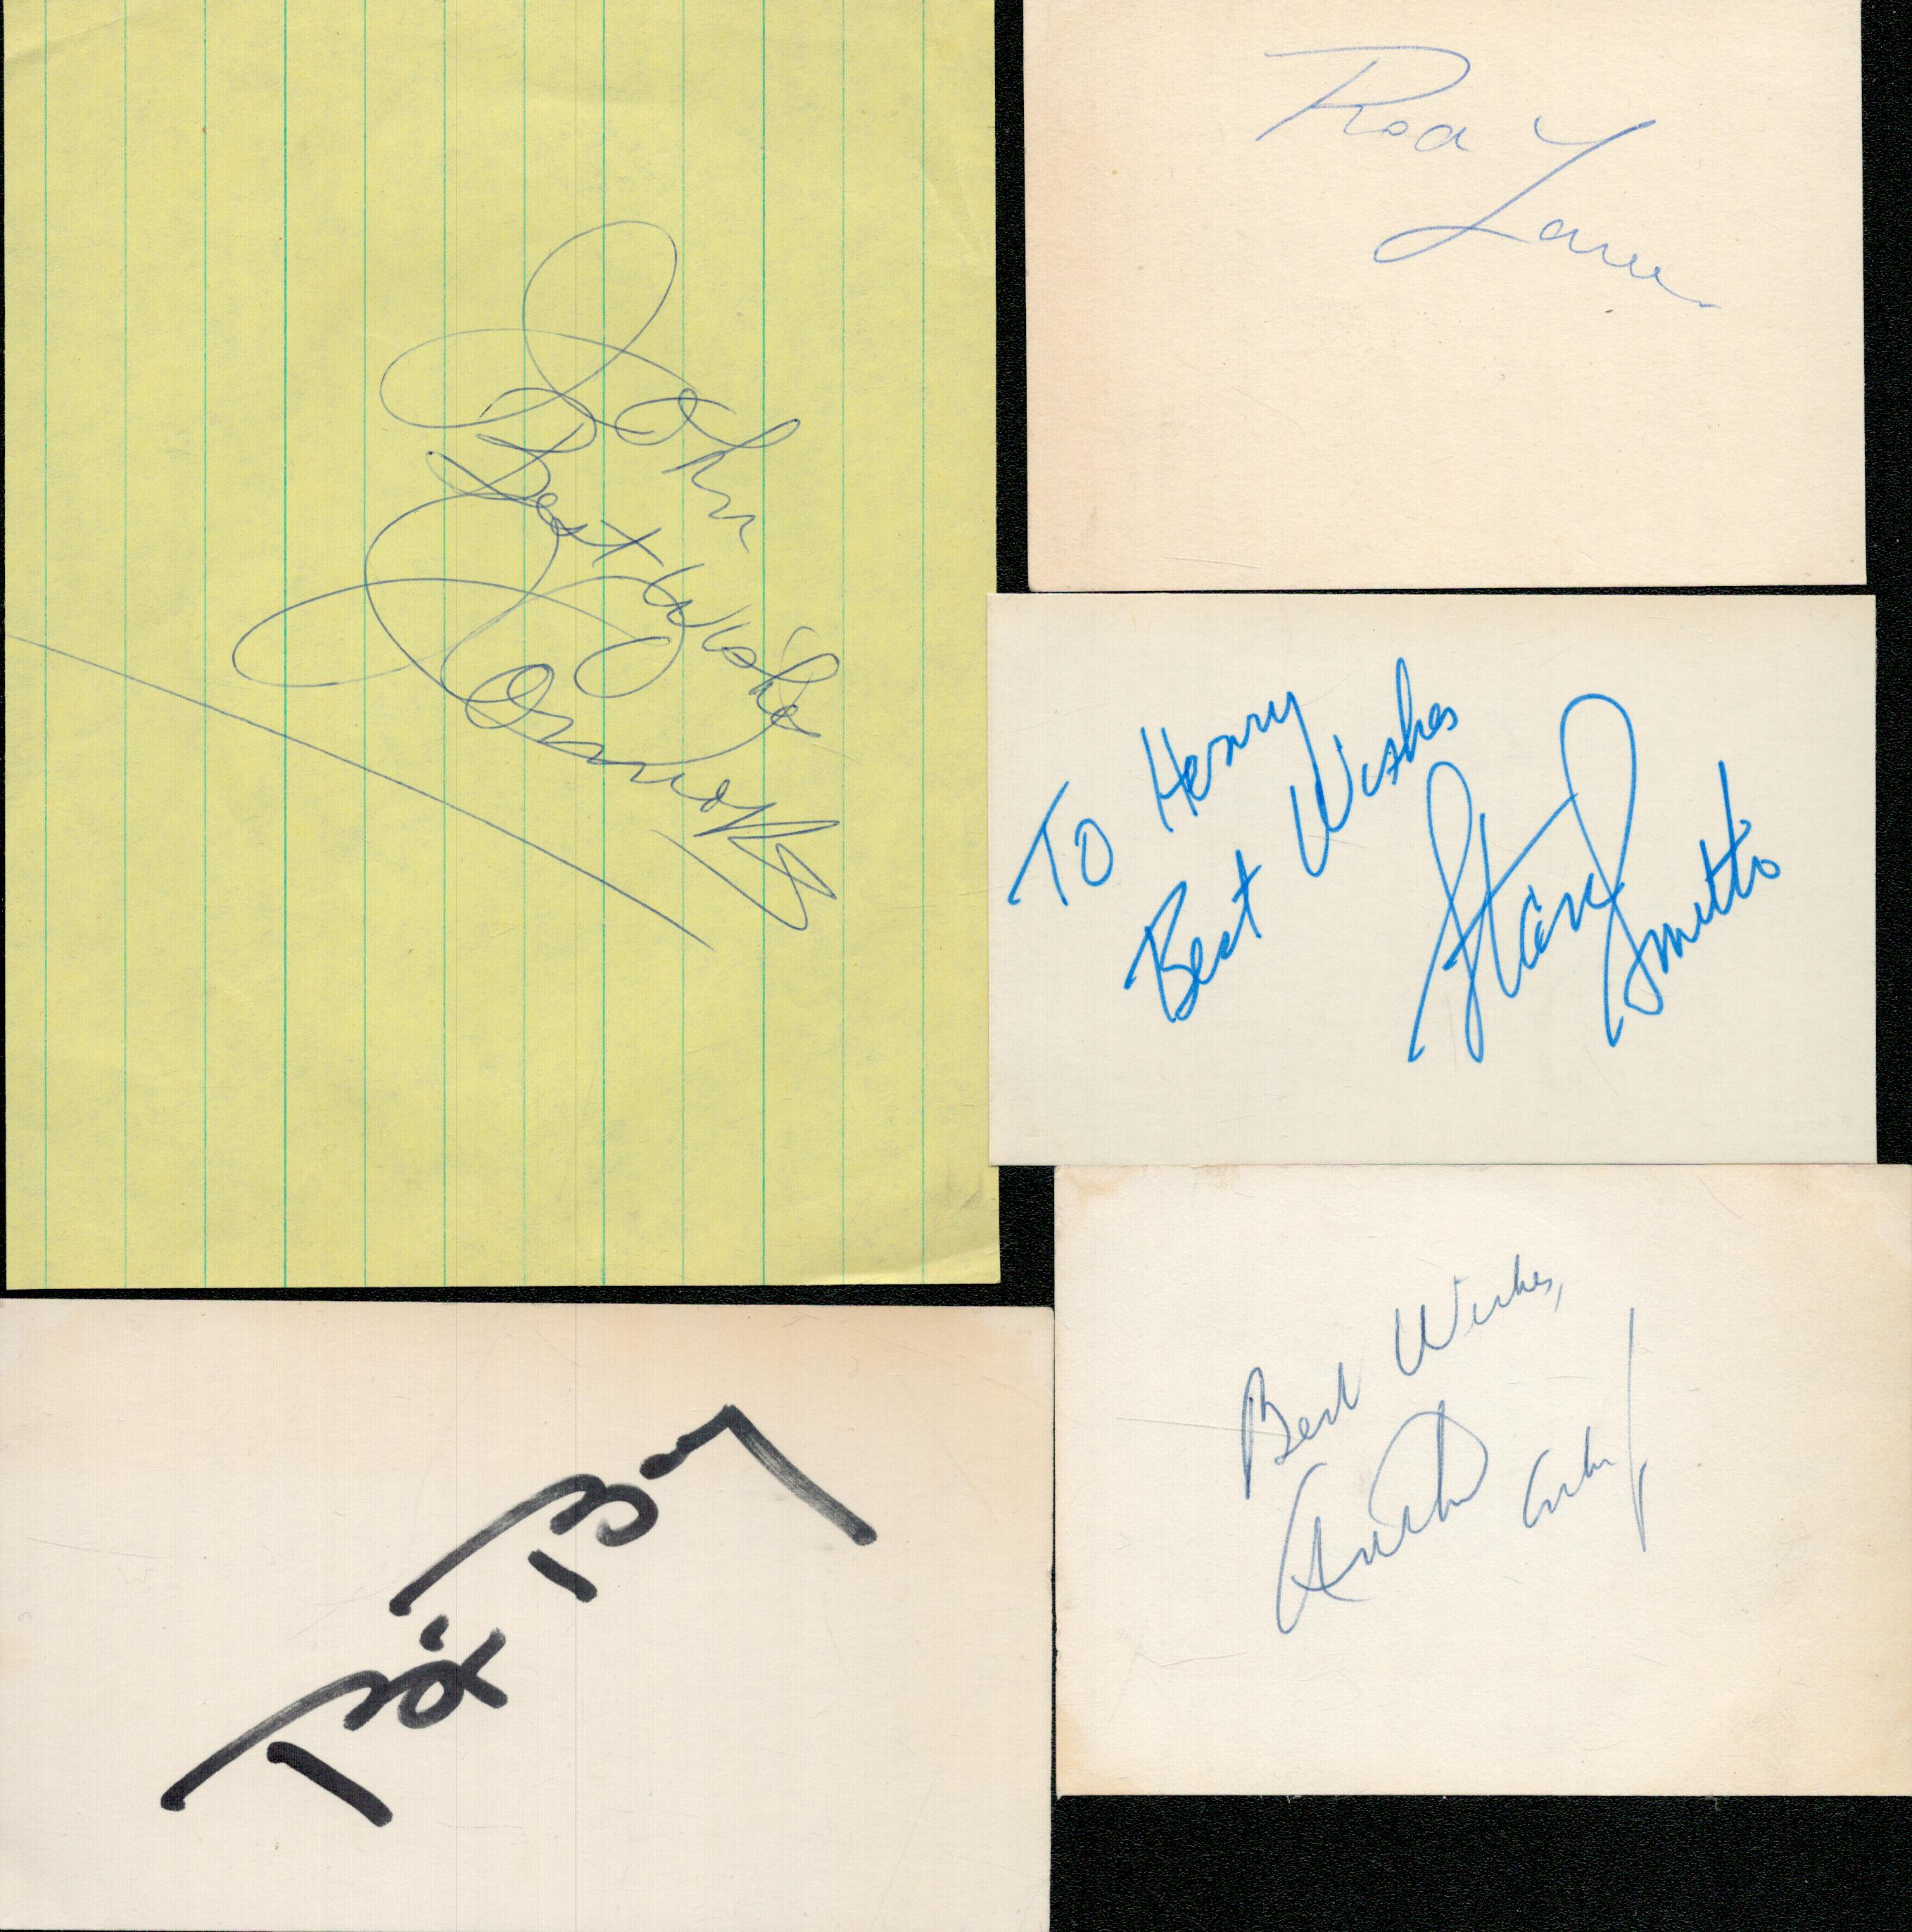 Tennis - Wimbledon mens singles champions - 5 signed items: Rod Laver (1961, 1962, 1968 and 1969),